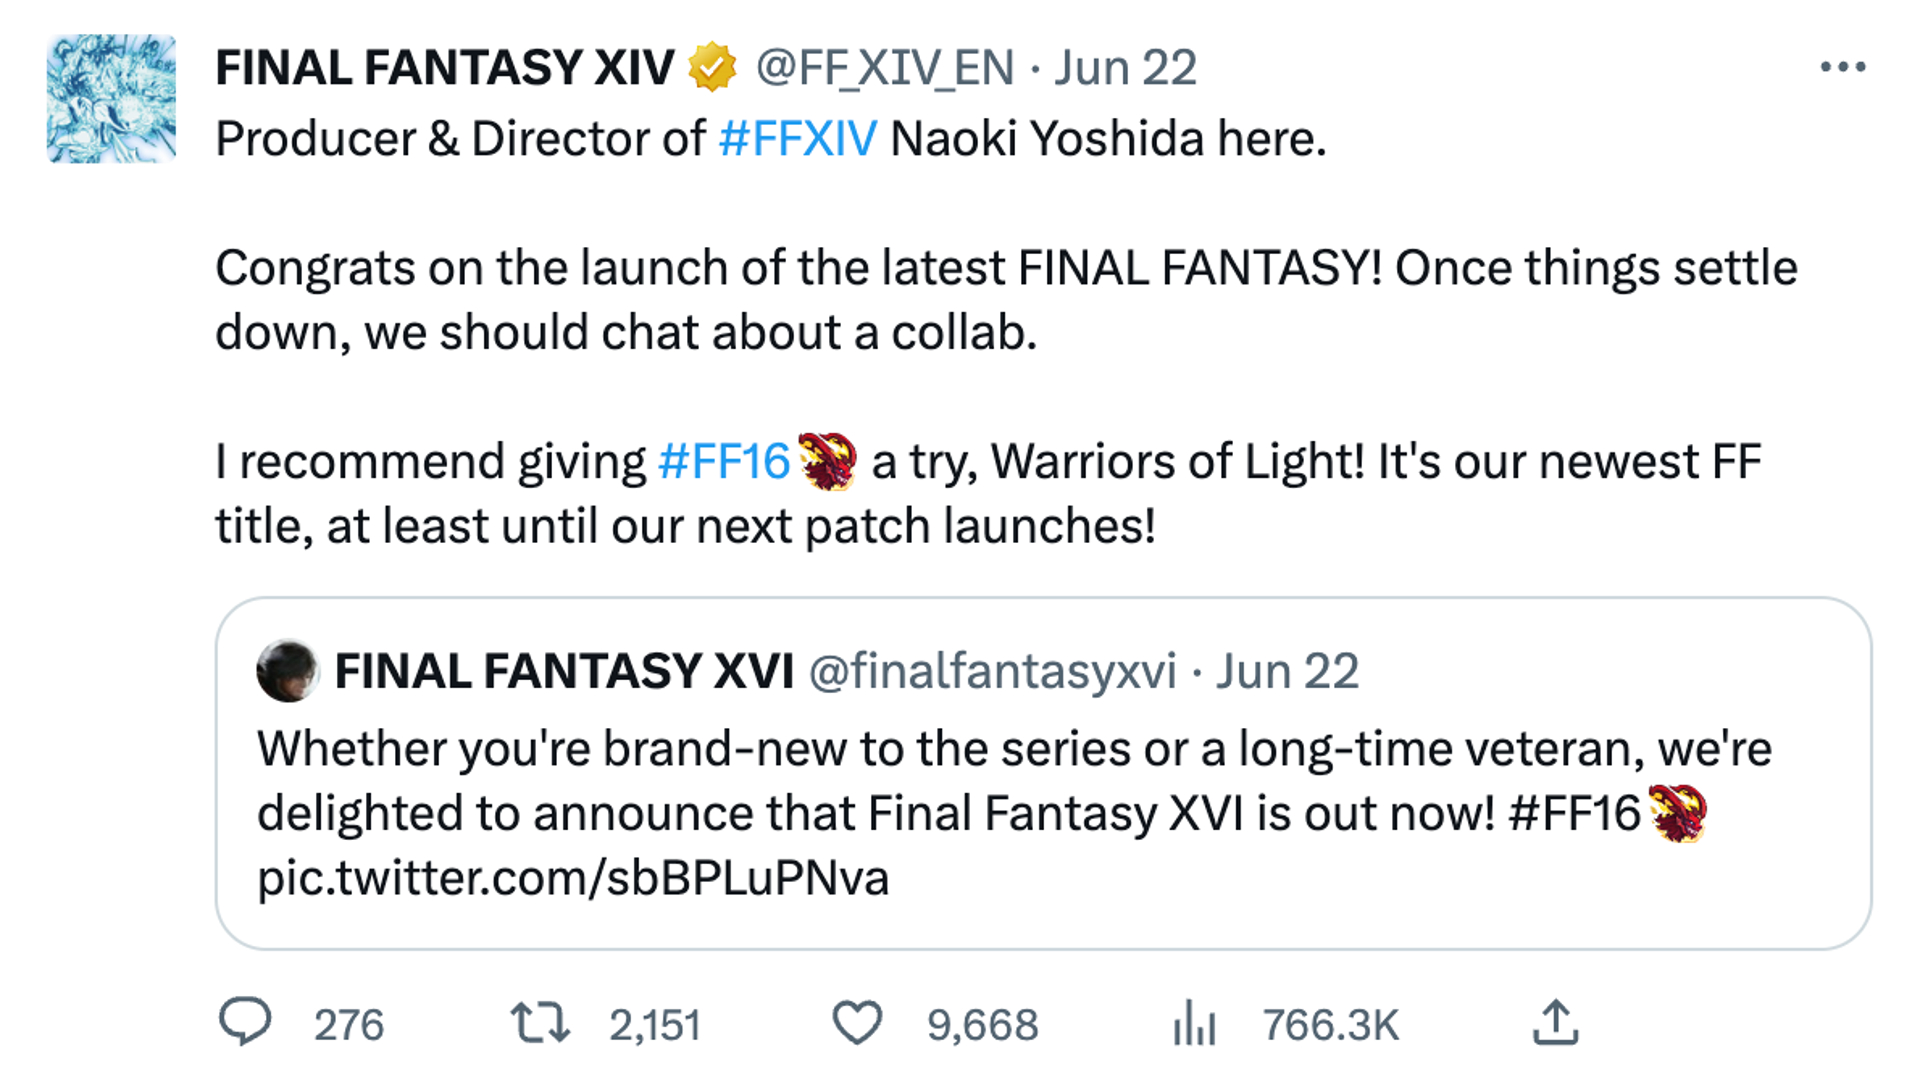 A Tweet from the official FFXIV Twitter congratulating FF16 for its launch